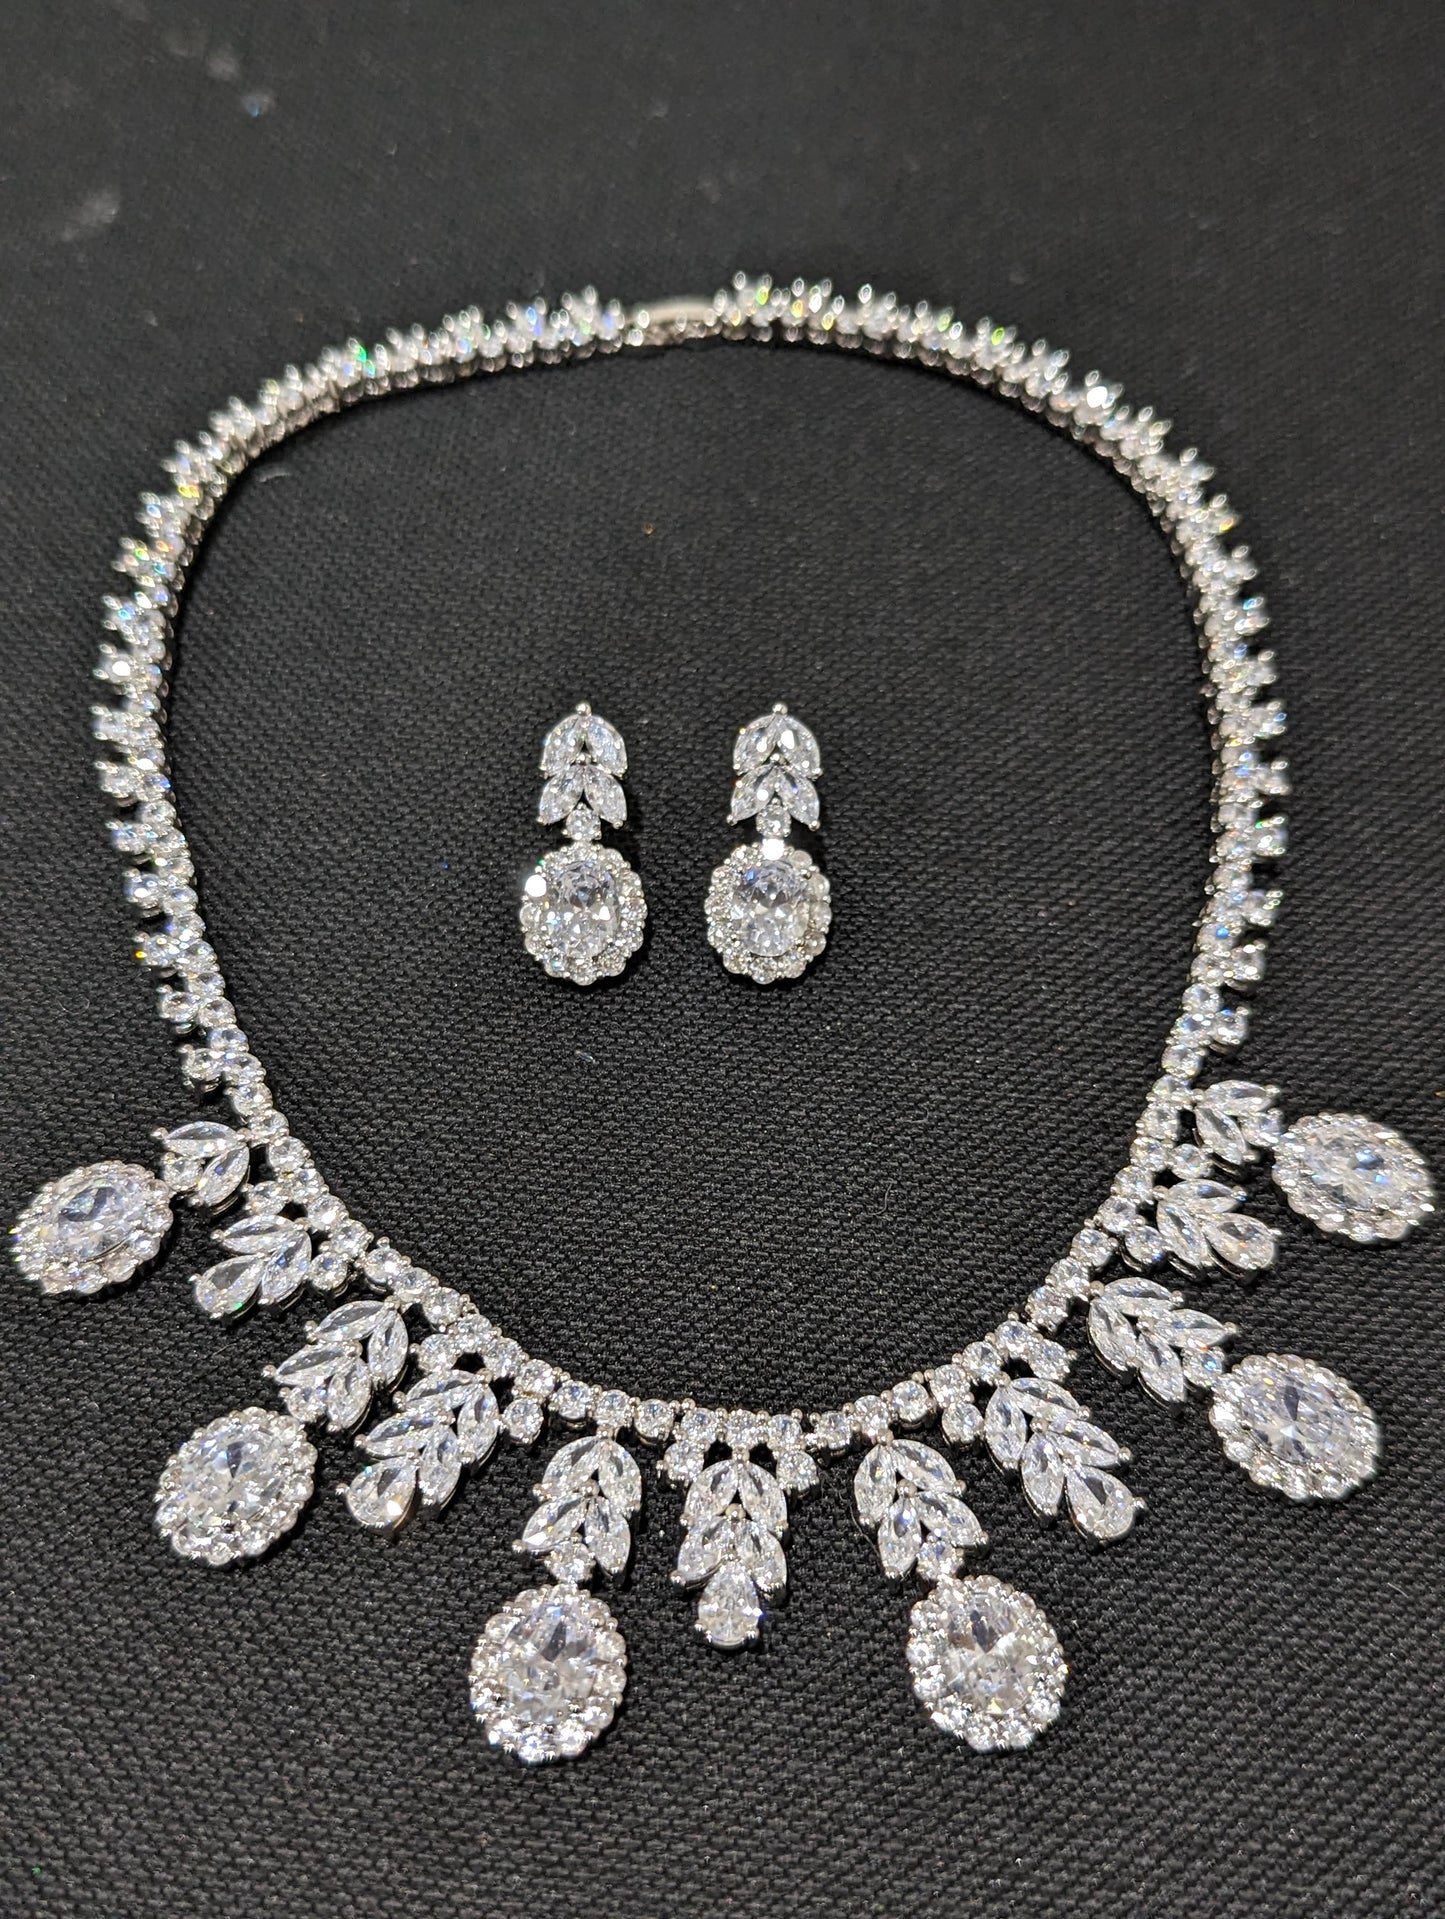 Diamond look Grand Shiny CZ Necklace and Earrings set